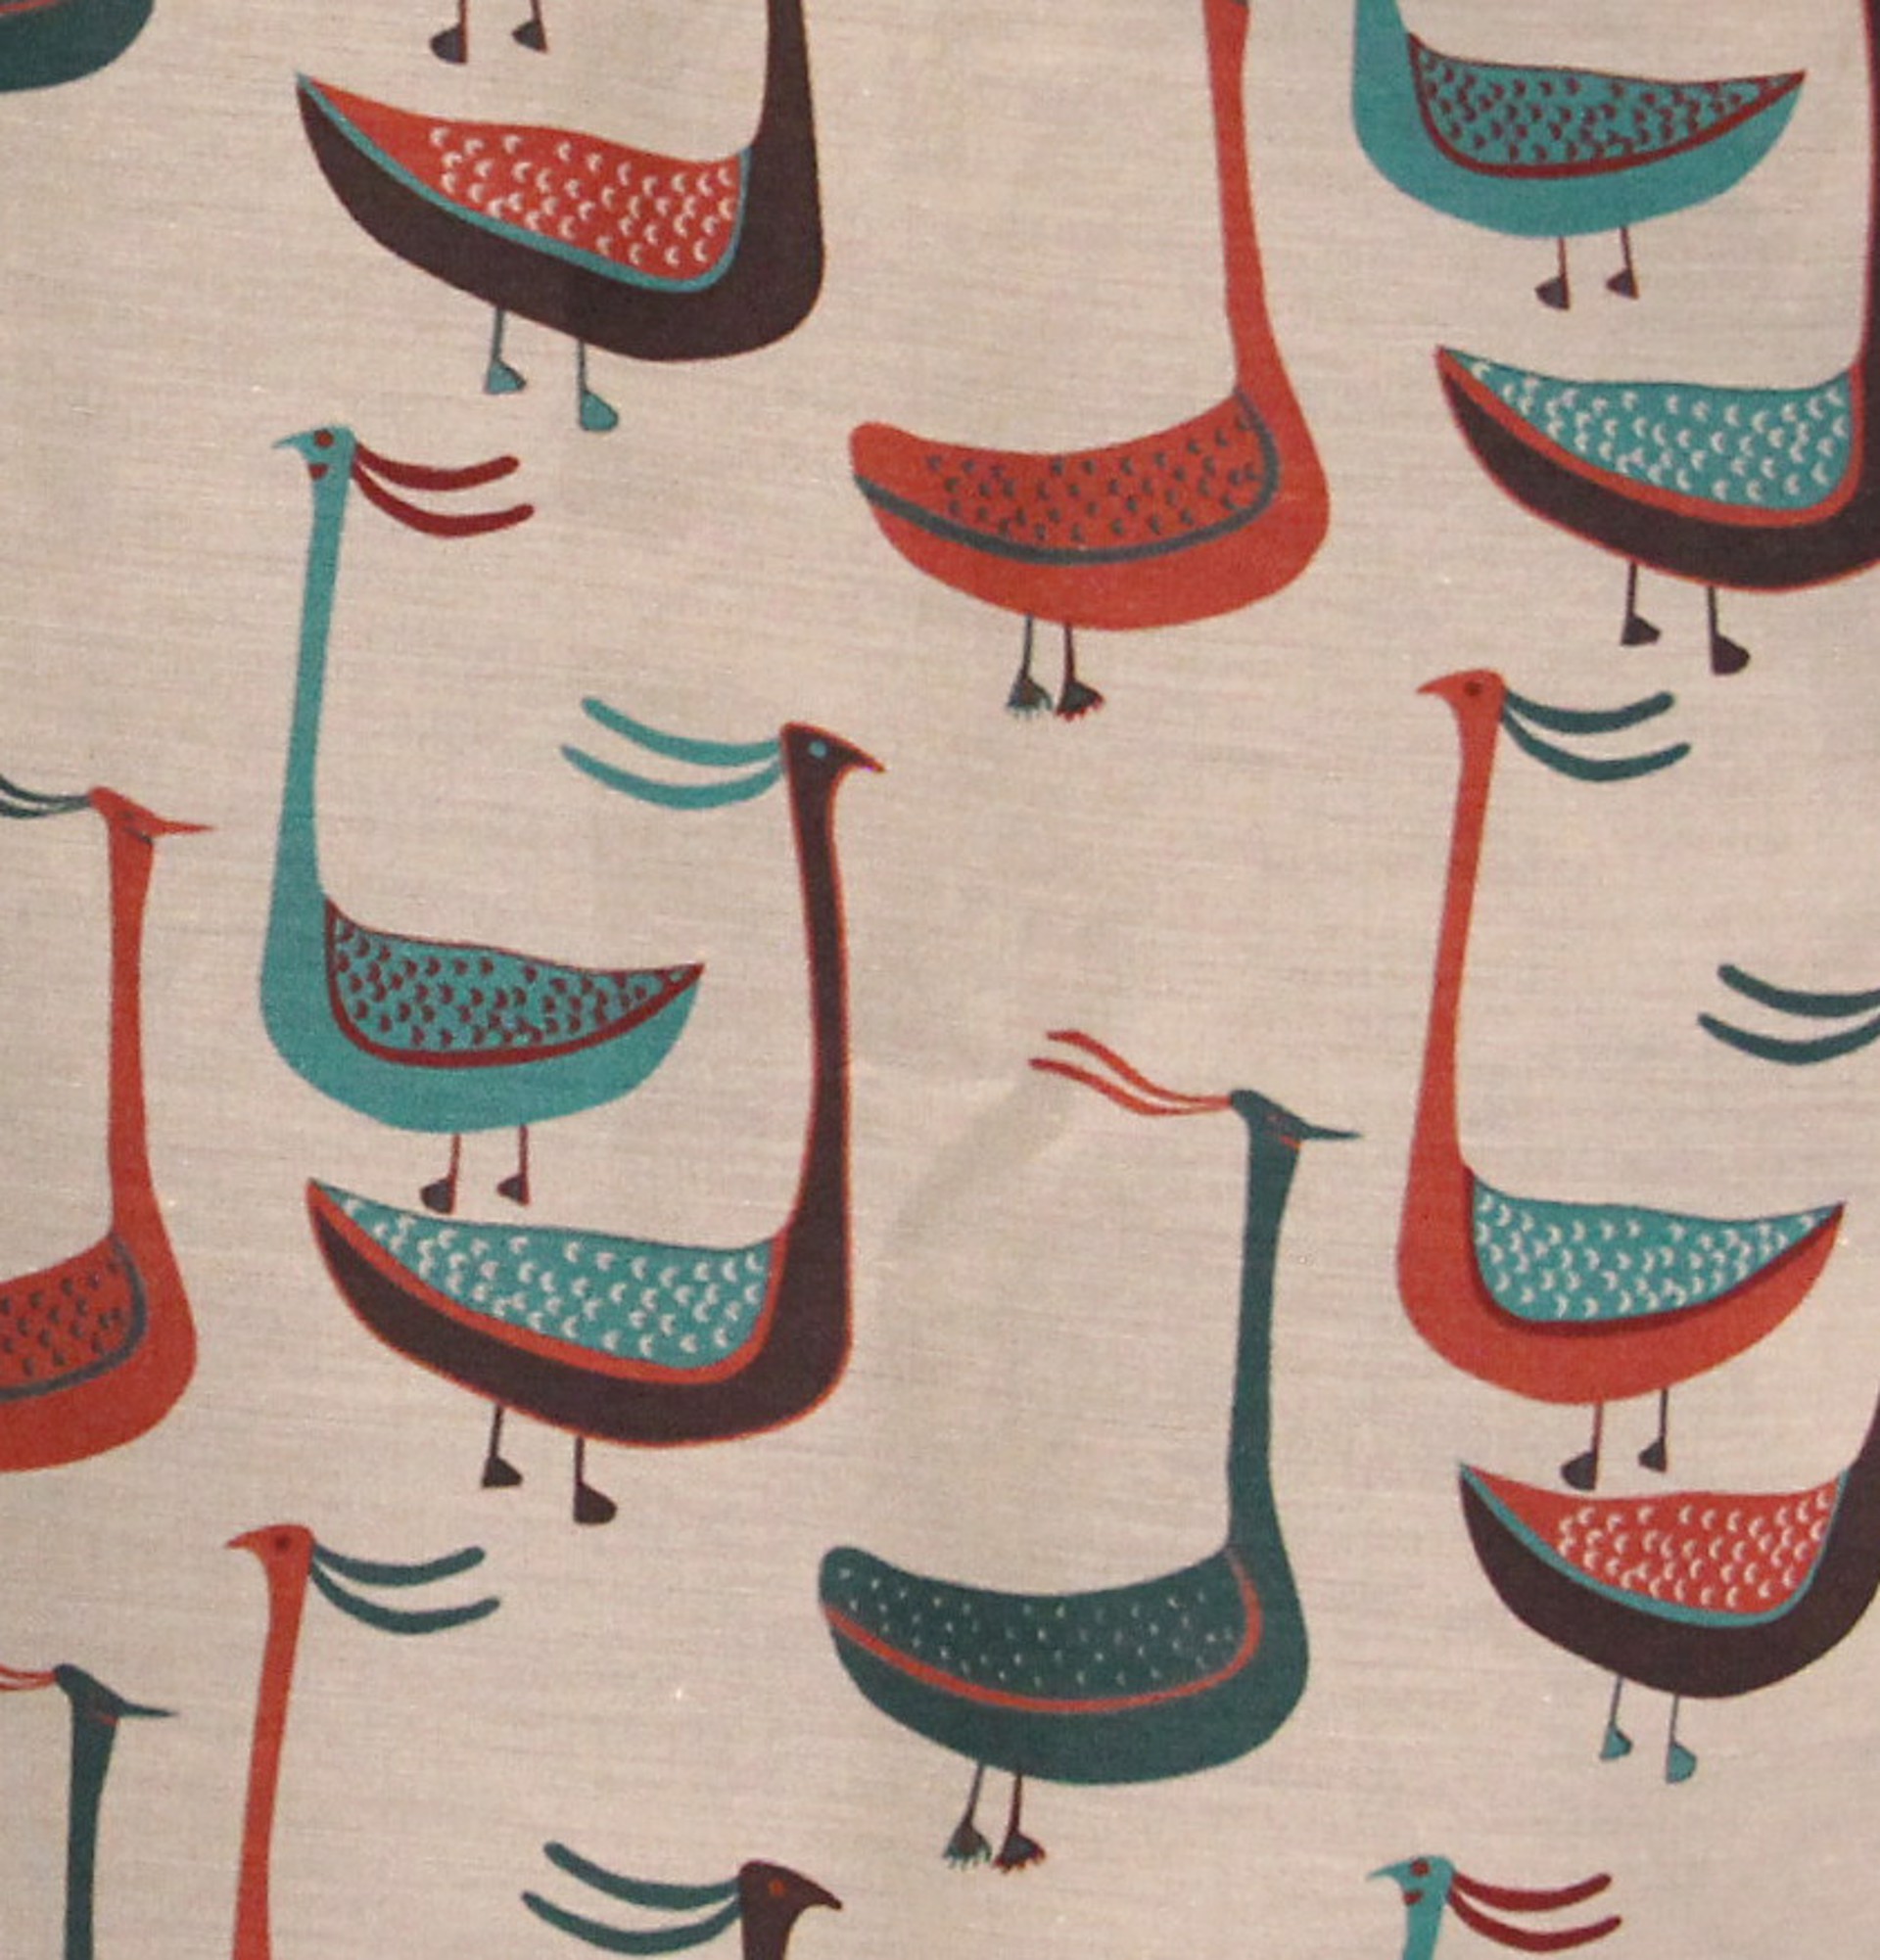 Fabulous Geese Scarf by Anirnik Oshuitoq